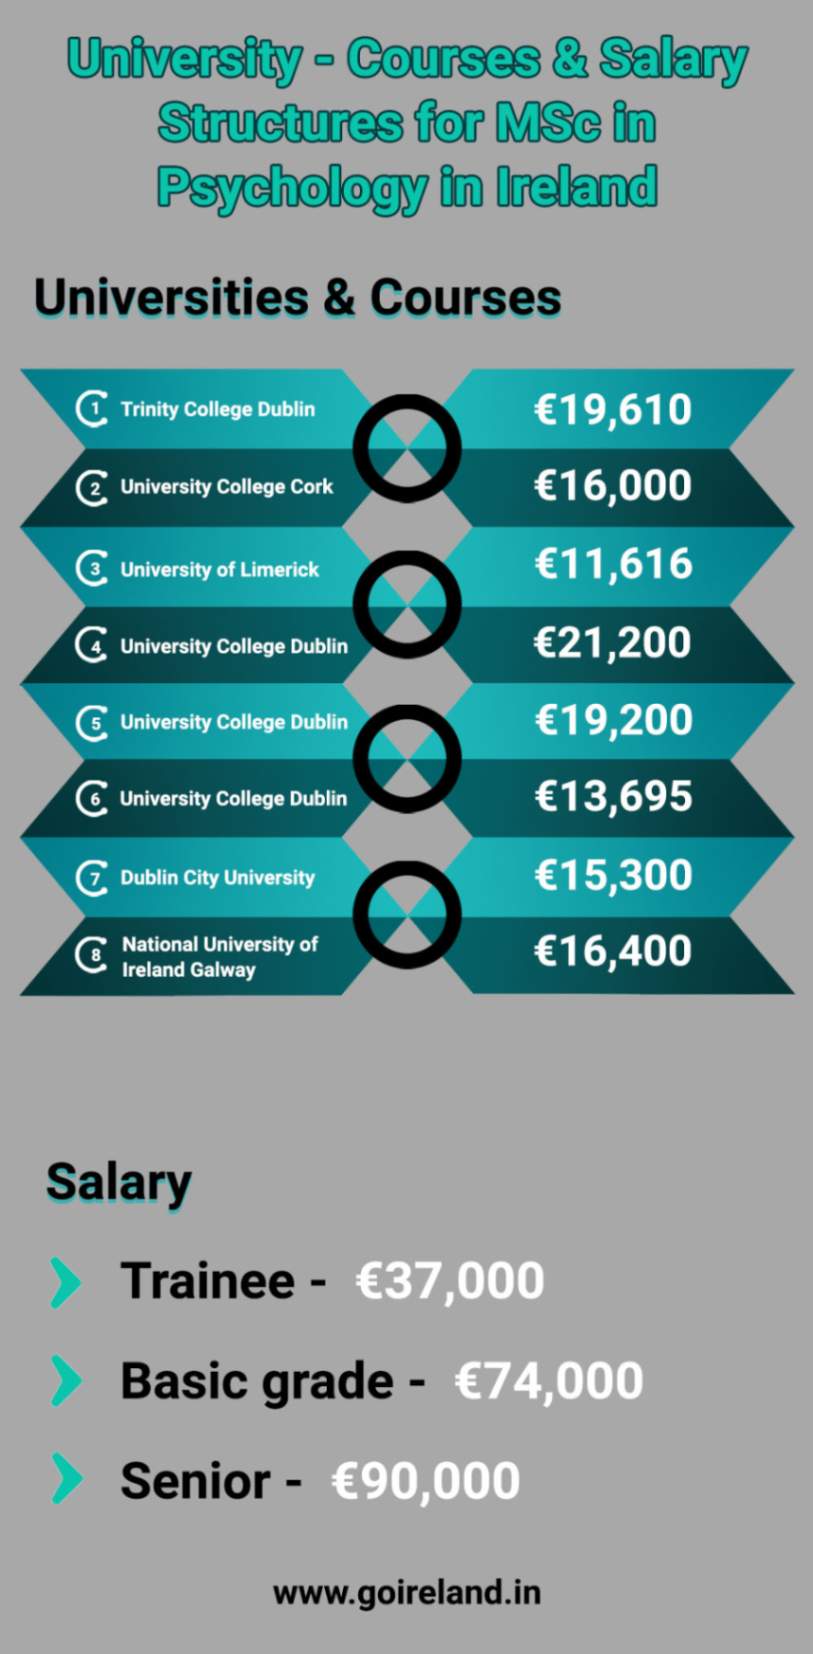 University-Courses and Salary Structures for MSc in Psychology in Ireland